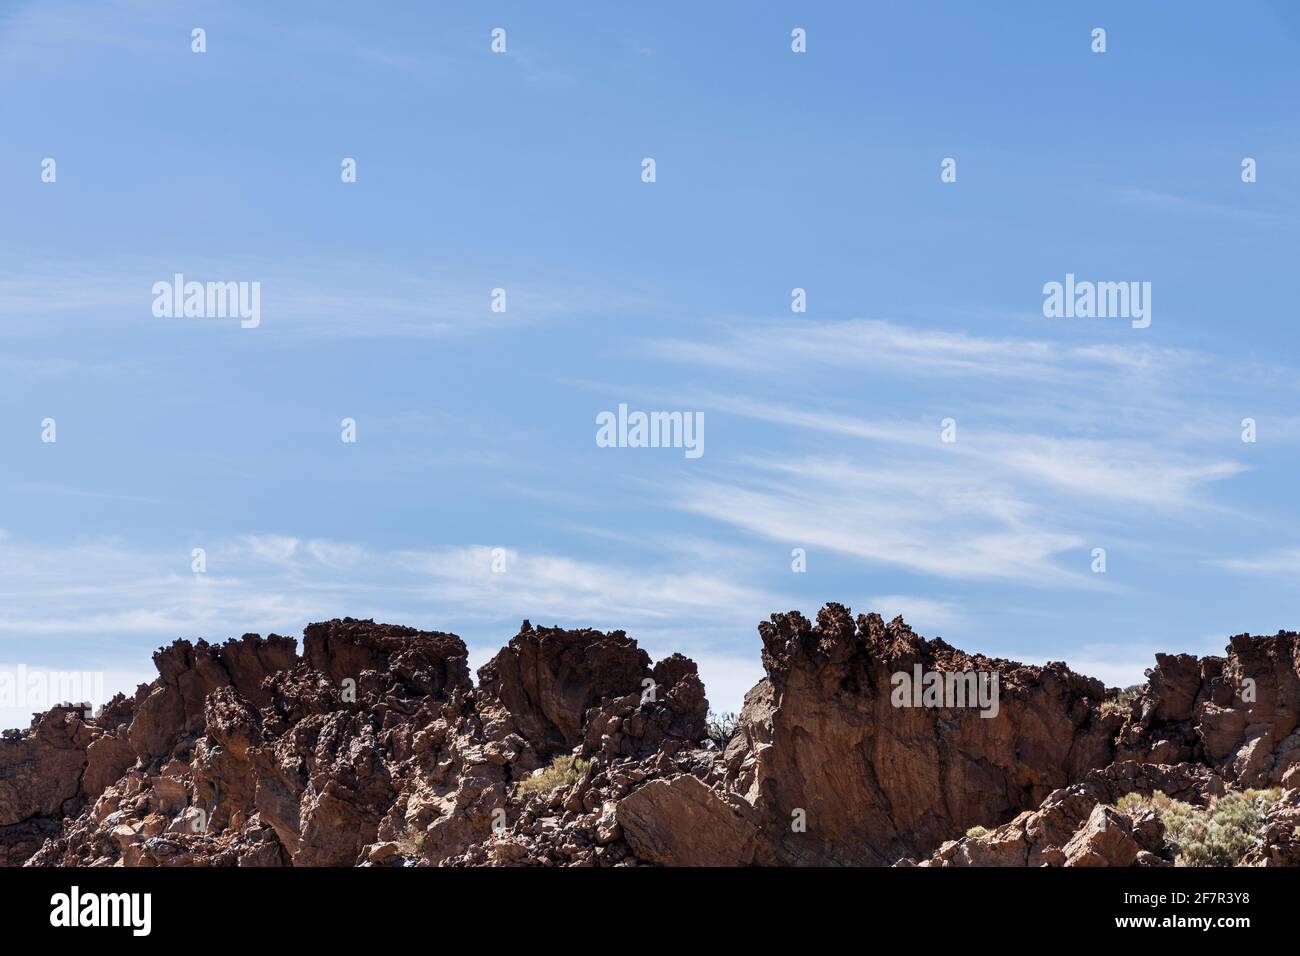 Jagged volcanic rocks and shrubs growing in the Las Canadas del Teide National Park, Tenerife, Canary Islands Stock Photo